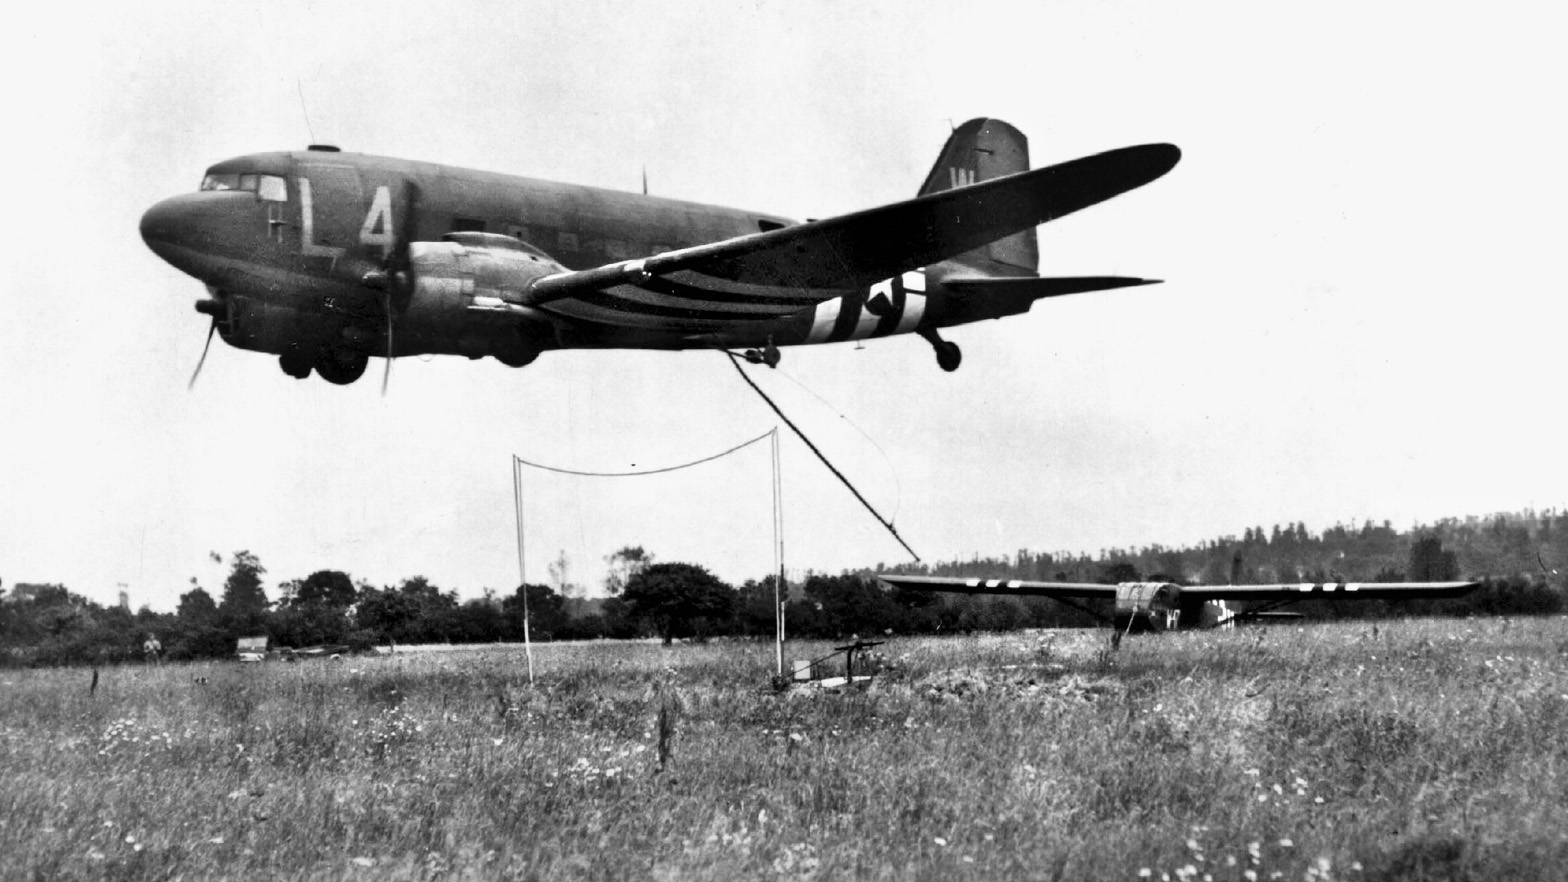 From D-Day to VE-Day in a C-47 - Warfare History Network